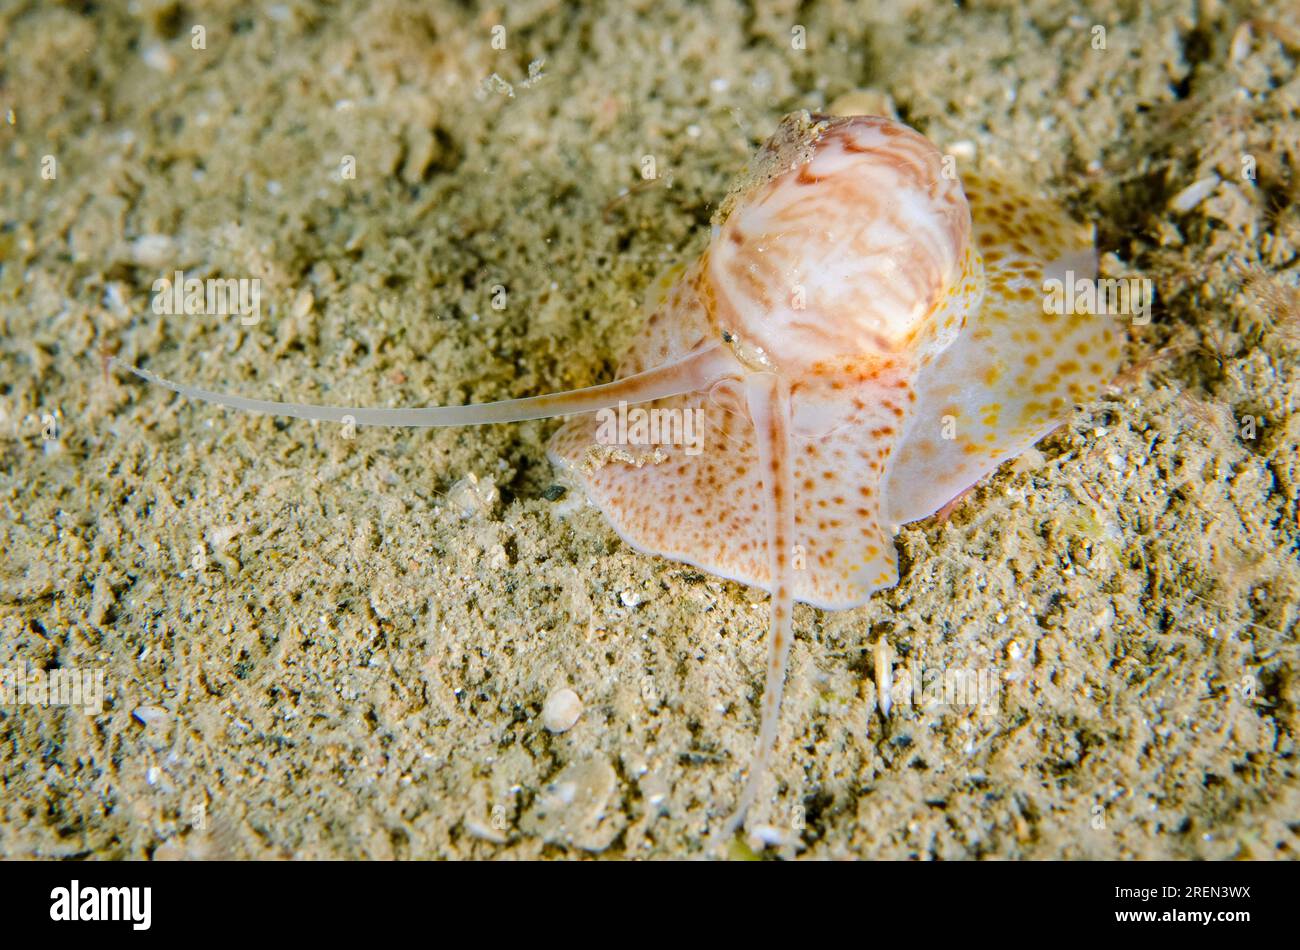 Nebulose Moon Snail, Natica cernica, on sand, Night dive, Dili Rock East dive site, Dili, East Timor Stock Photo